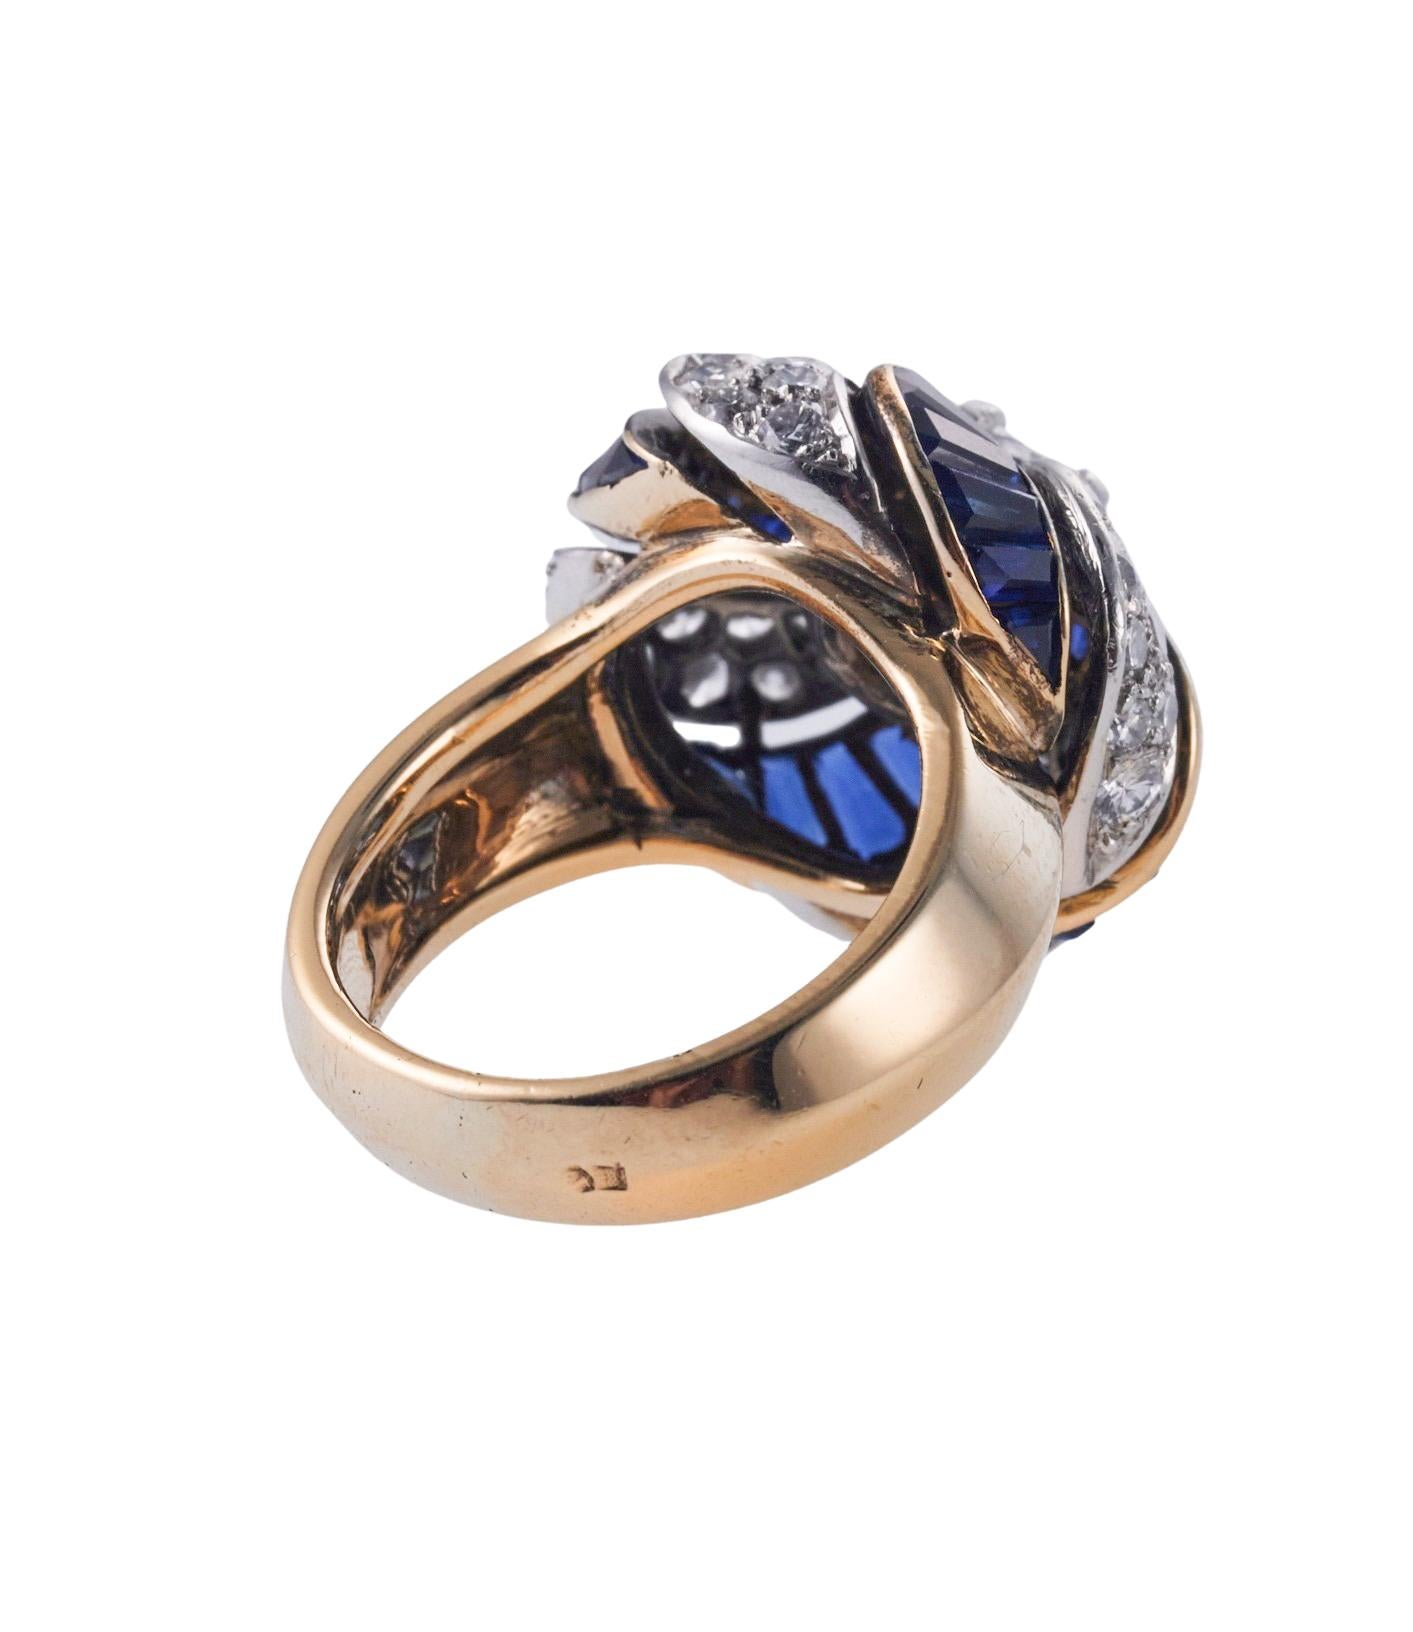 Women's Van Cleef & Arpels Sapphire Diamond Gold Cocktail Ring For Sale